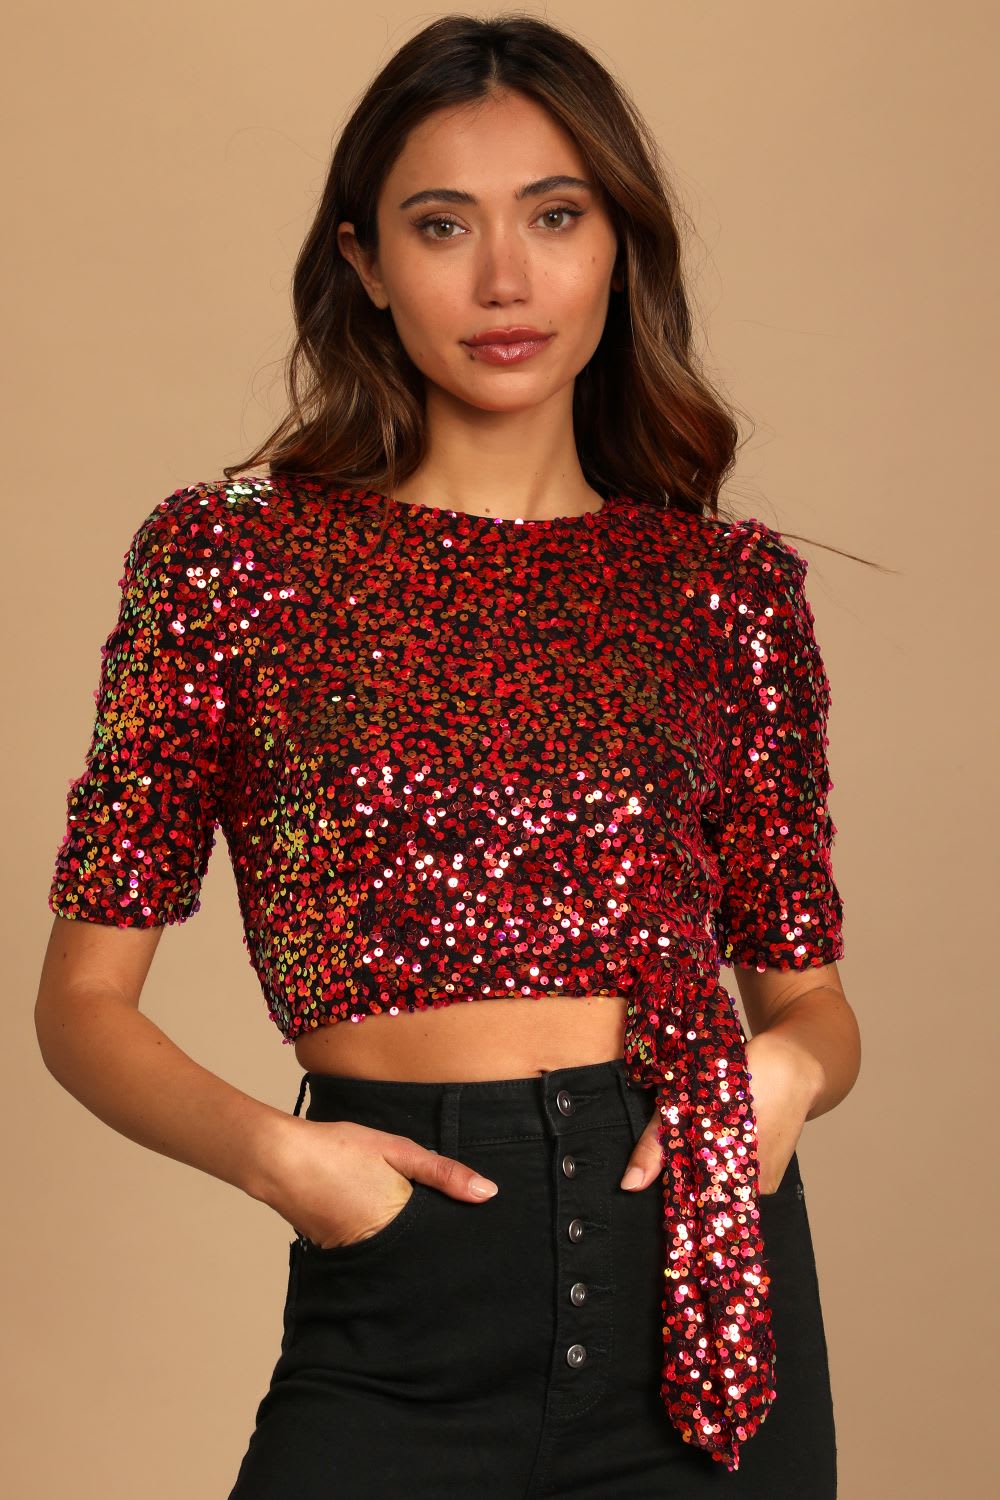 Supersonic hastighed Forbyde Jeg vil have Dressy Holiday Tops: Gorgeous Party Tops For 2022 - Lulus.com Fashion Blog